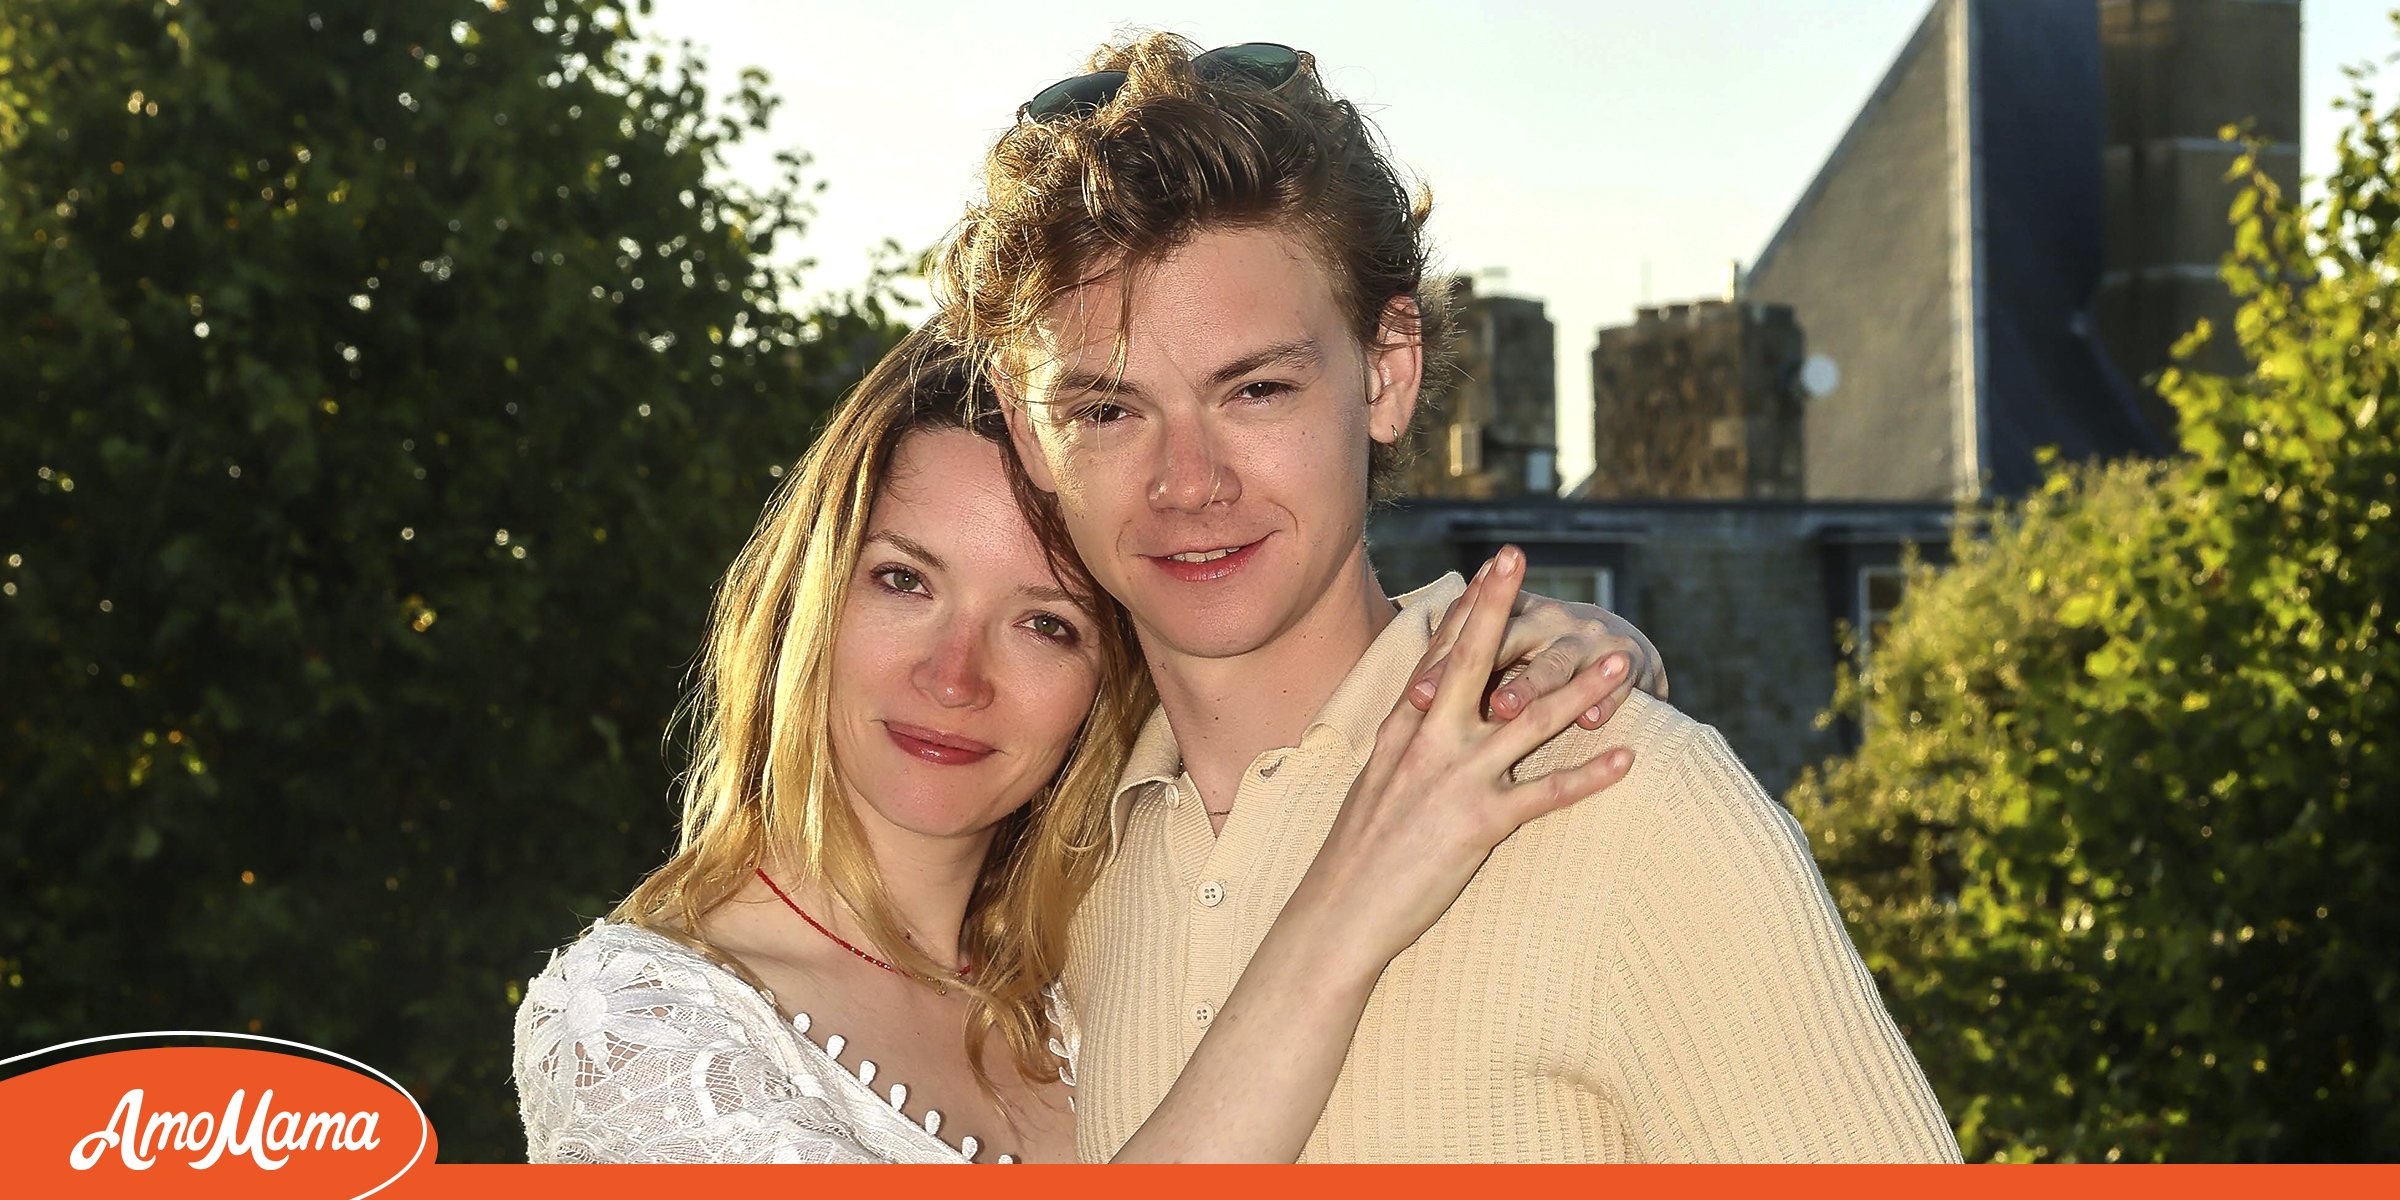 Thomas BrodieSangster and Talulah Riley’s Relationship Facts to Know